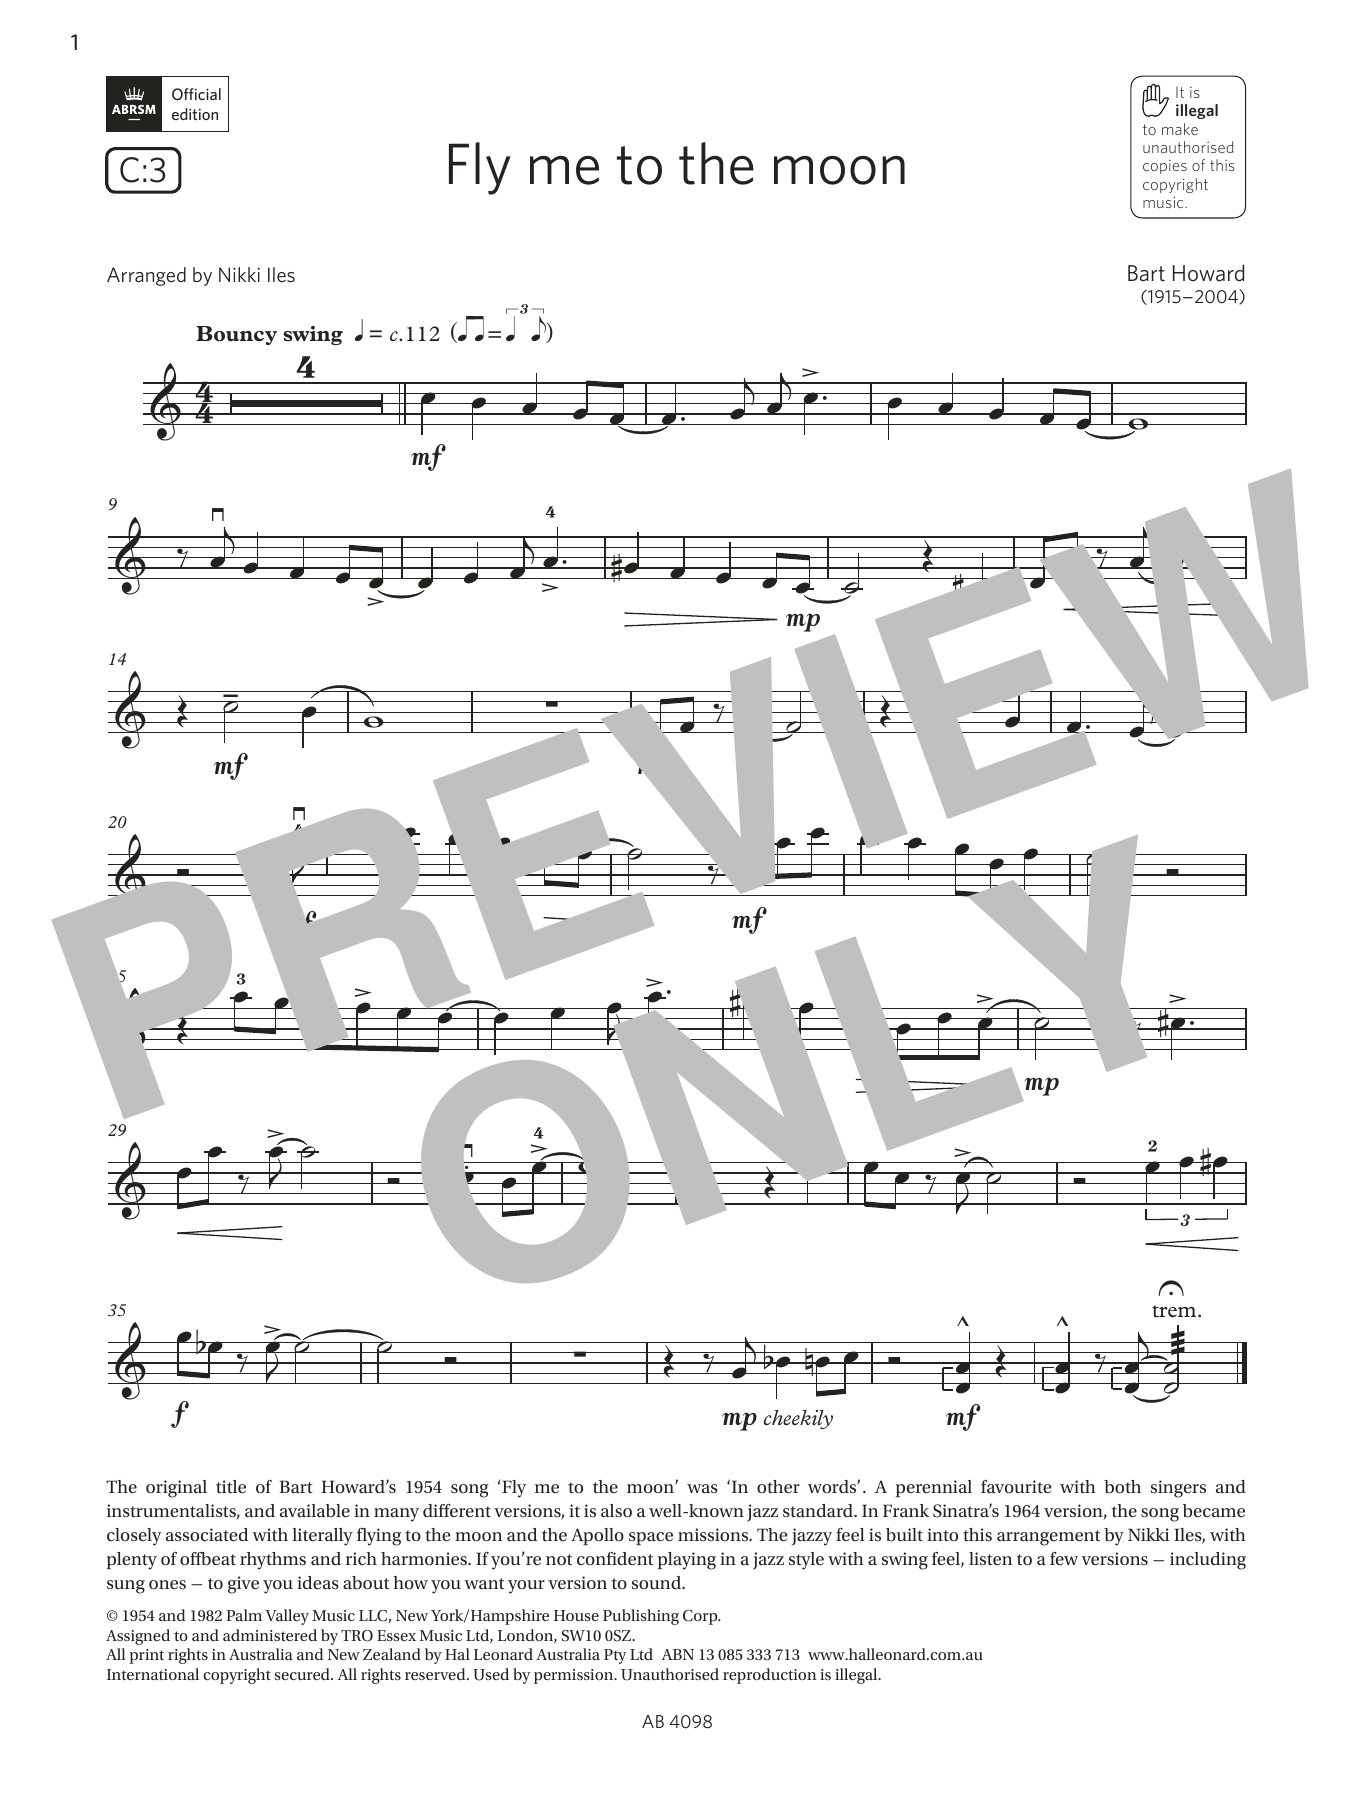 Download Bart Howard Fly me to the moon (Grade 4, C3, from t Sheet Music